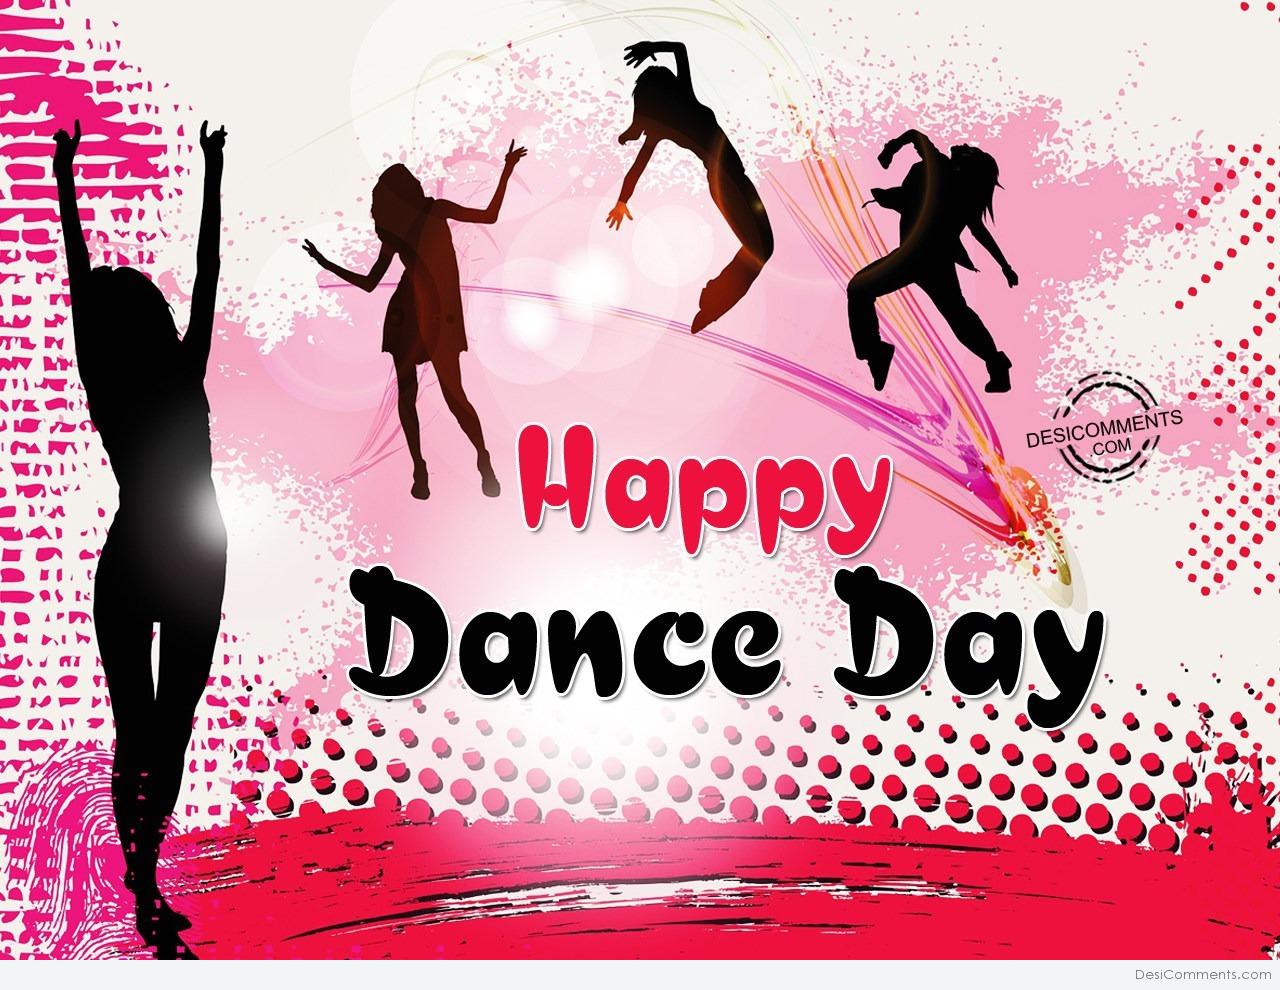 Dance Day Picture, Image, Photo